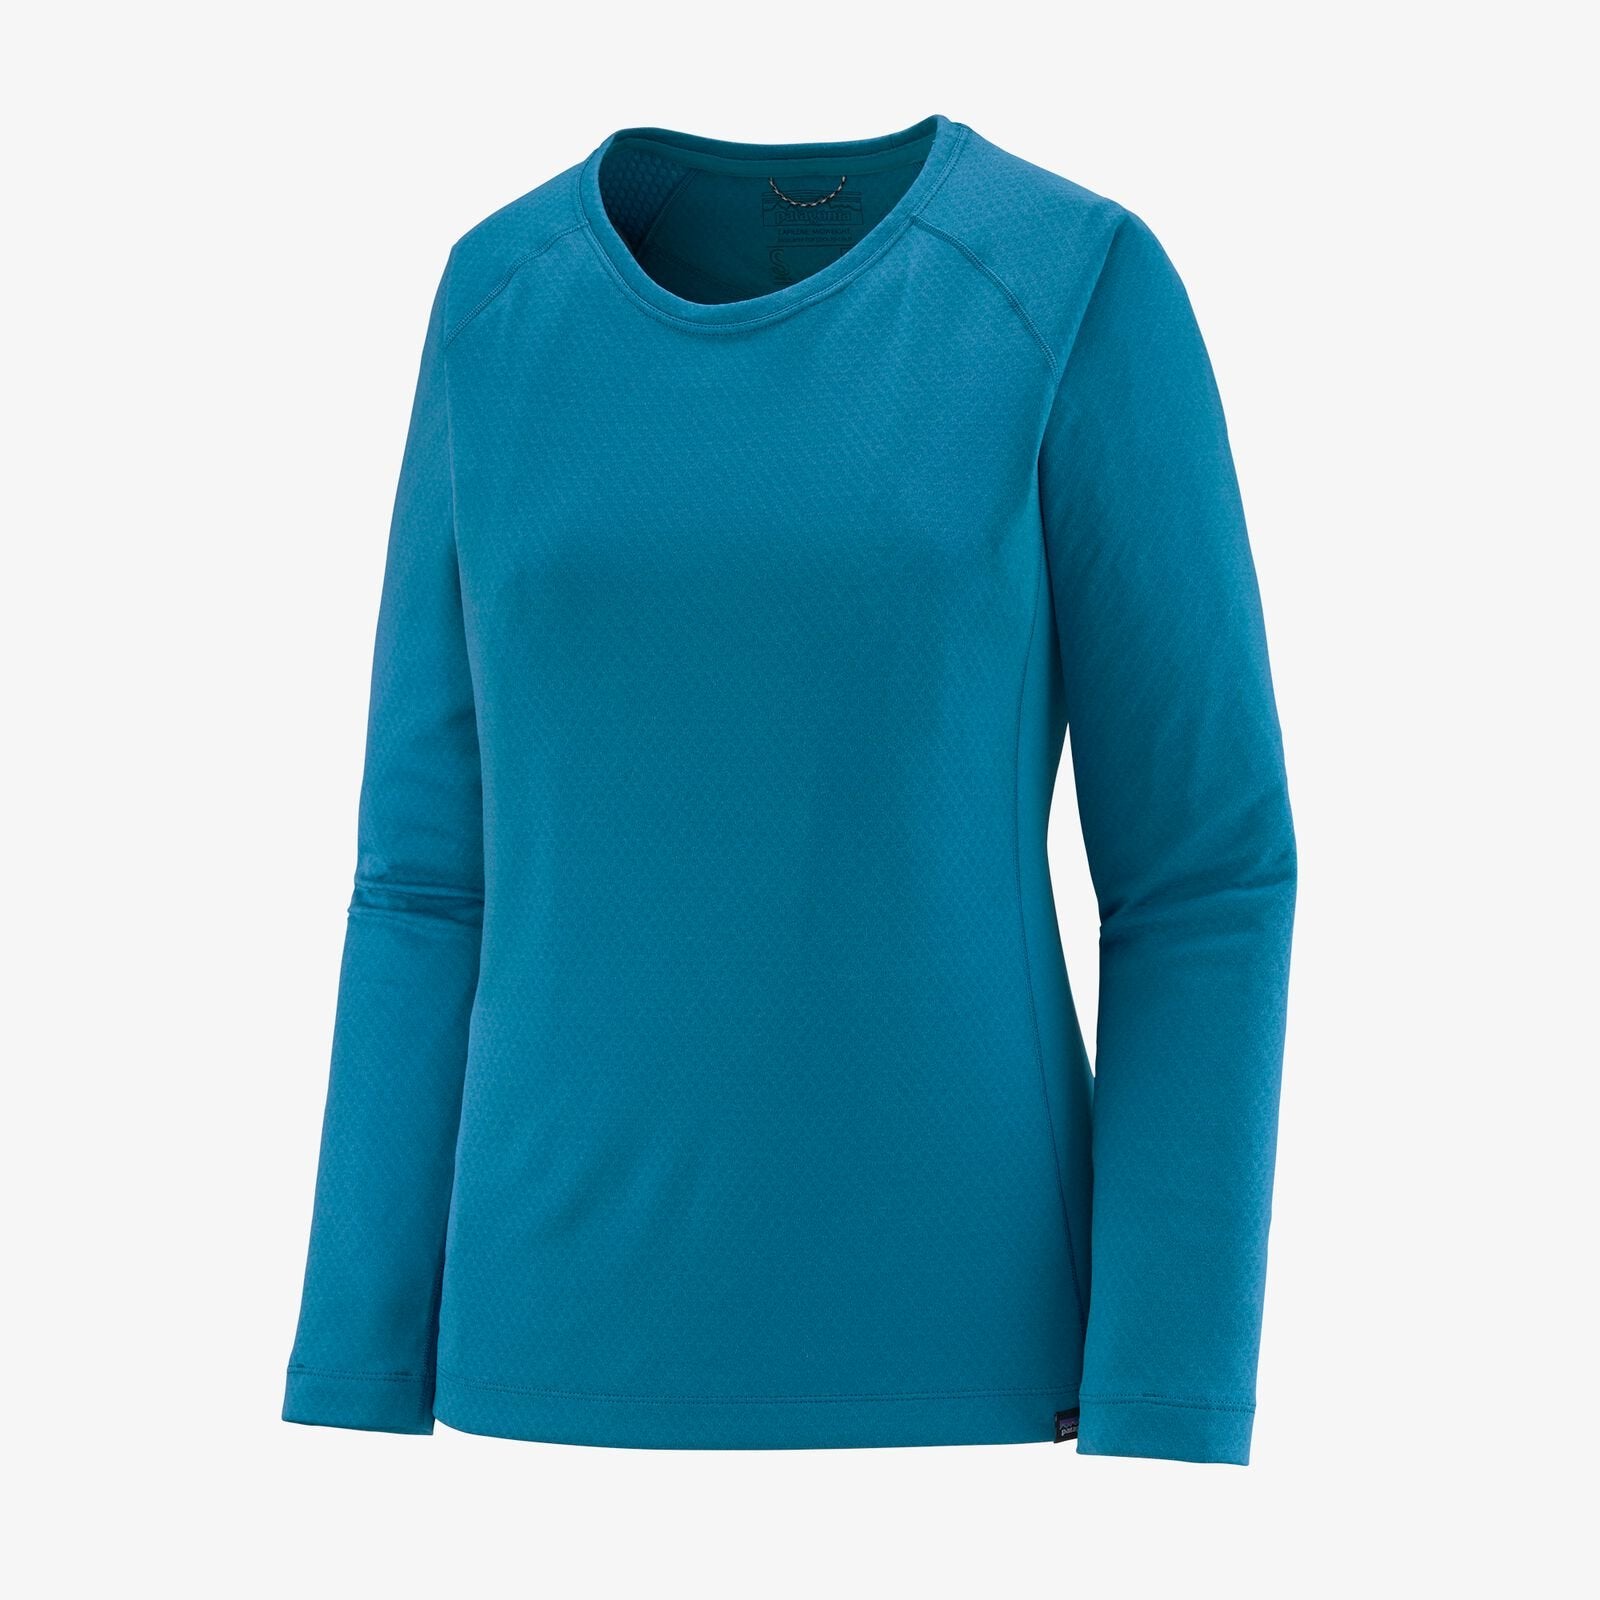 Women's Baselayers - Forests, Tides, and Treasures